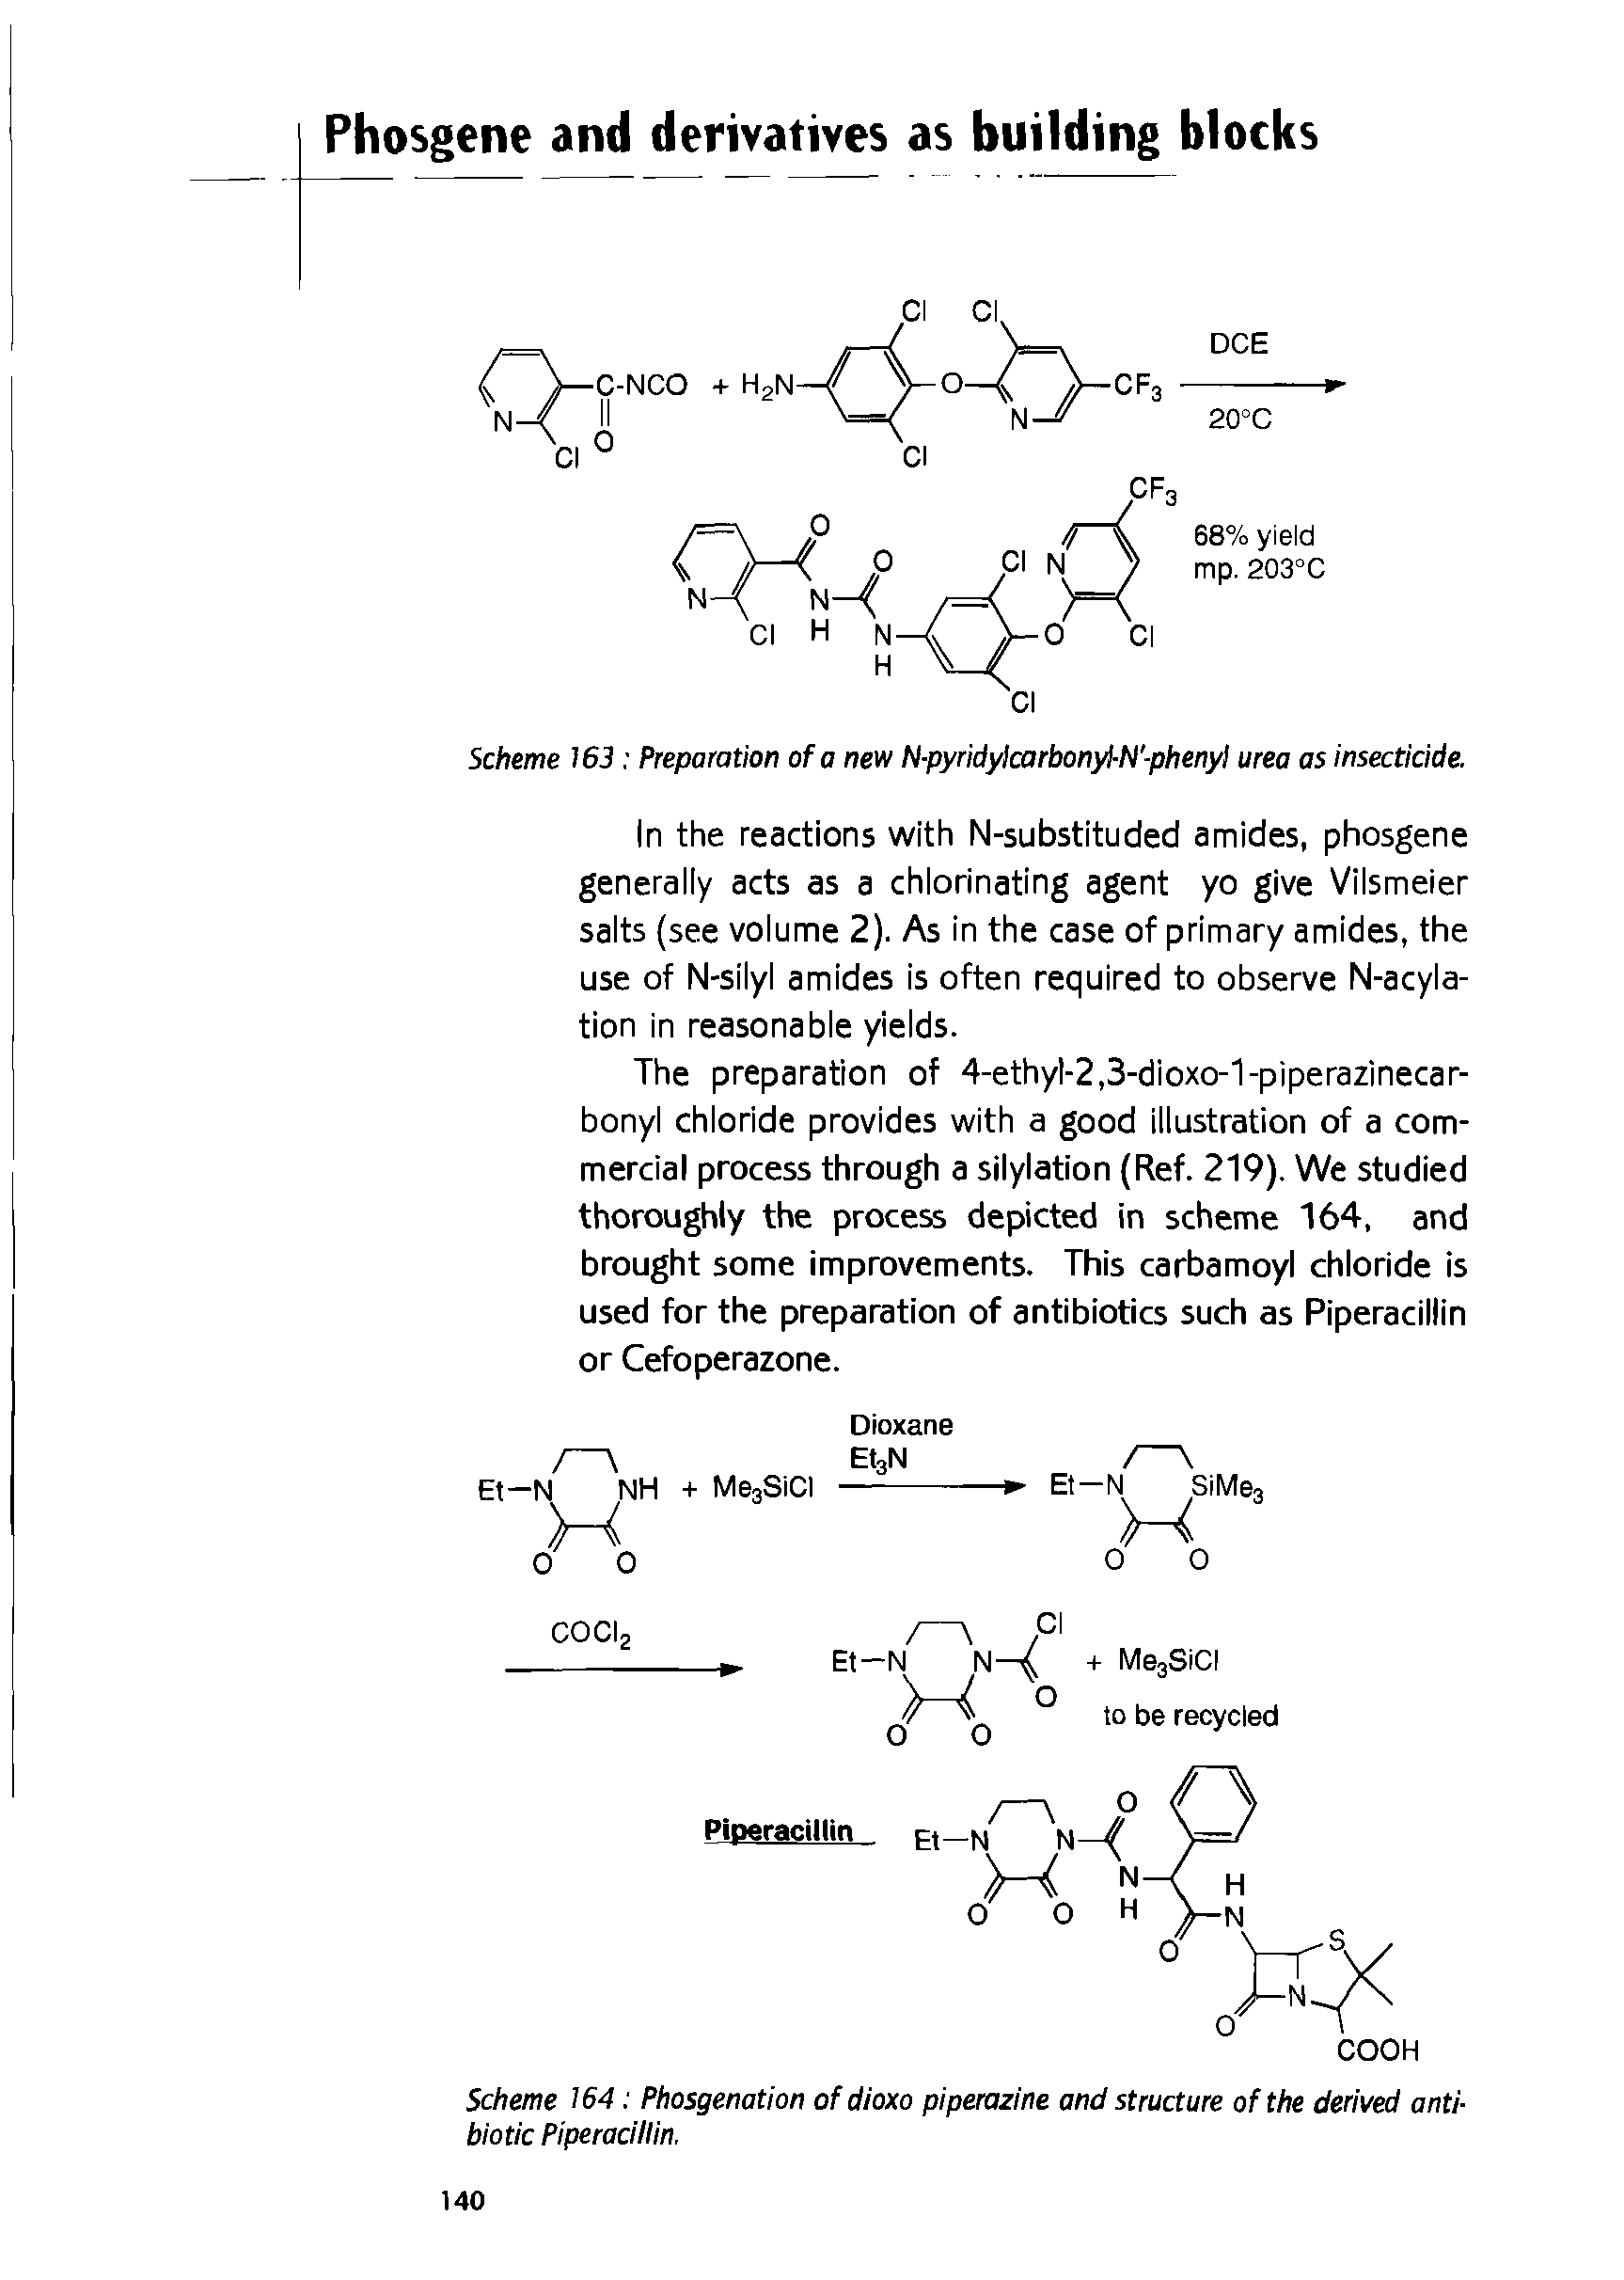 Scheme 164 Phosgenation of dioxo piperazine and structure of the derived antibiotic Piperacillin,...